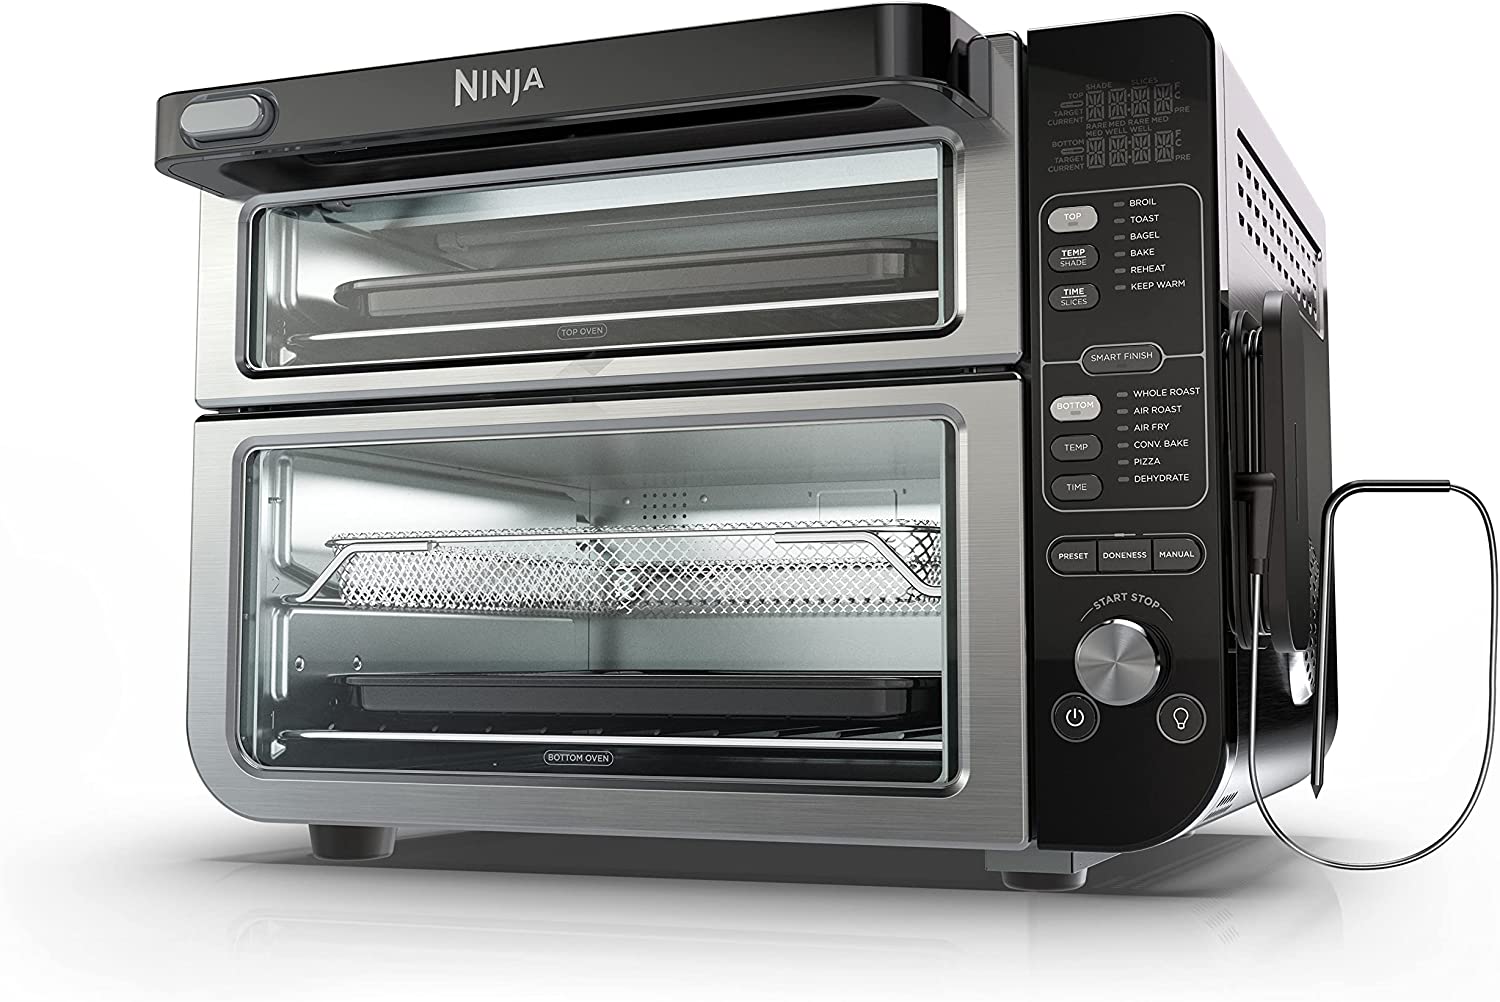 Ninja DCT451 12-in-1 Smart Double Oven with FlexDoor, Smart Thermometer, FlavorSeal, Smart Finish, Rapid Top Oven, Convection and Air Fry Bottom Oven, Stainless Steel